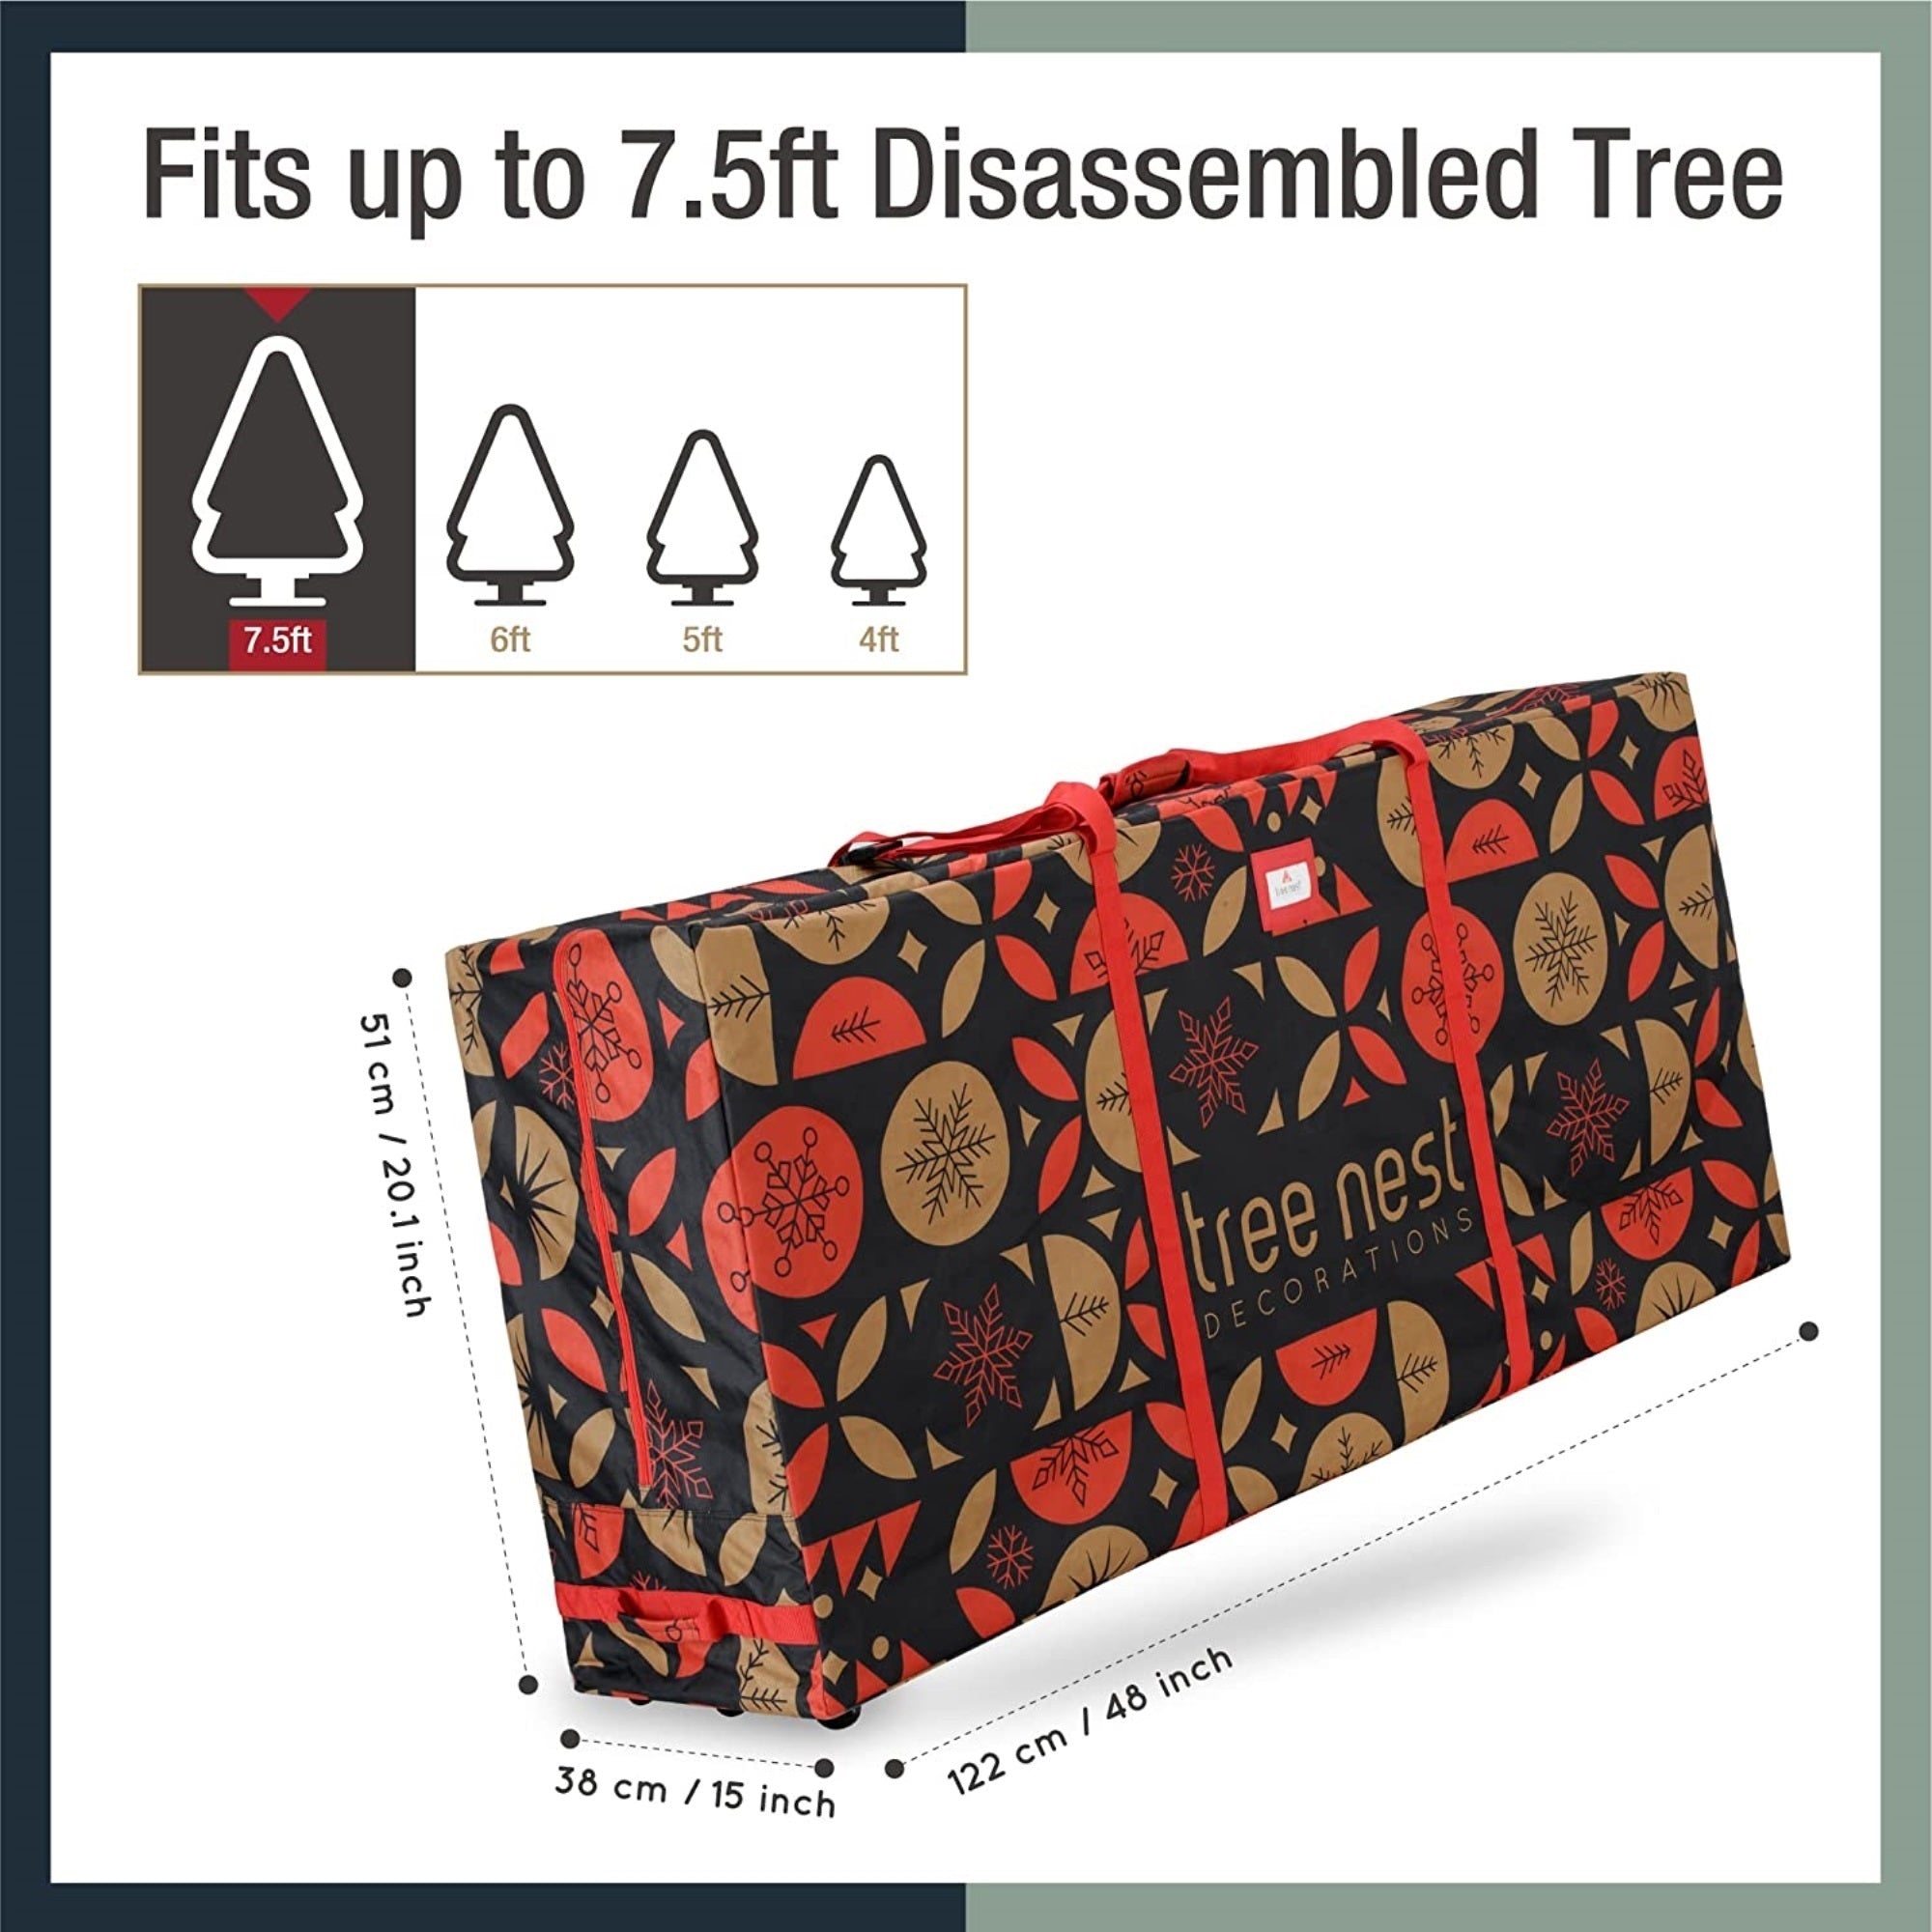 Tree Nest Rolling Christmas Tree Storage Bag, Stylish Canvas Christmas Tree Box for Artificial Disassembled Trees 7.5ft